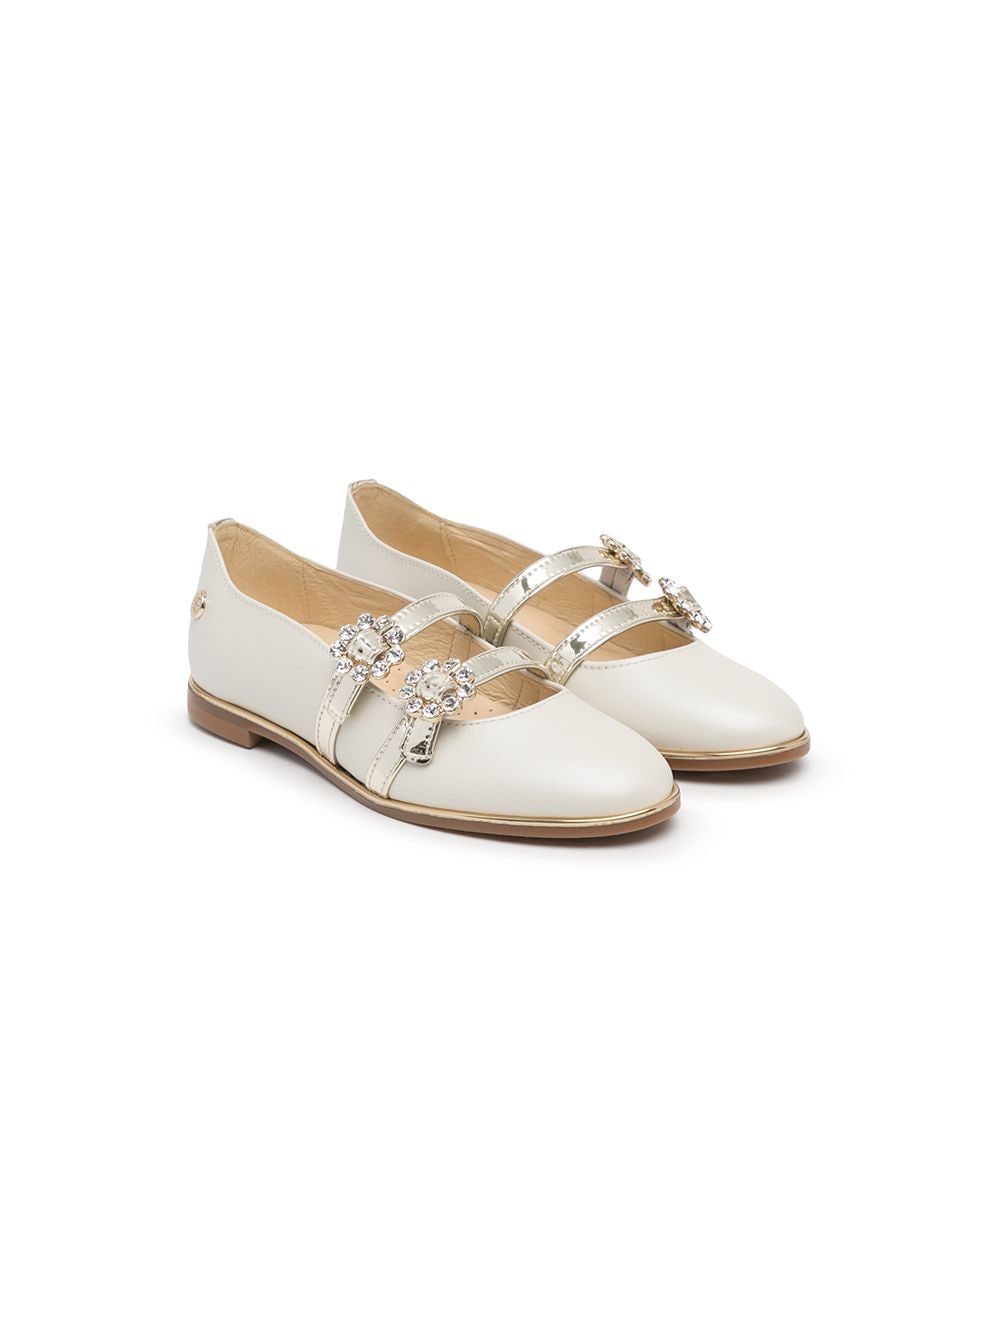 ANDANINES crystal buckle ballerina shoes - White von ANDANINES